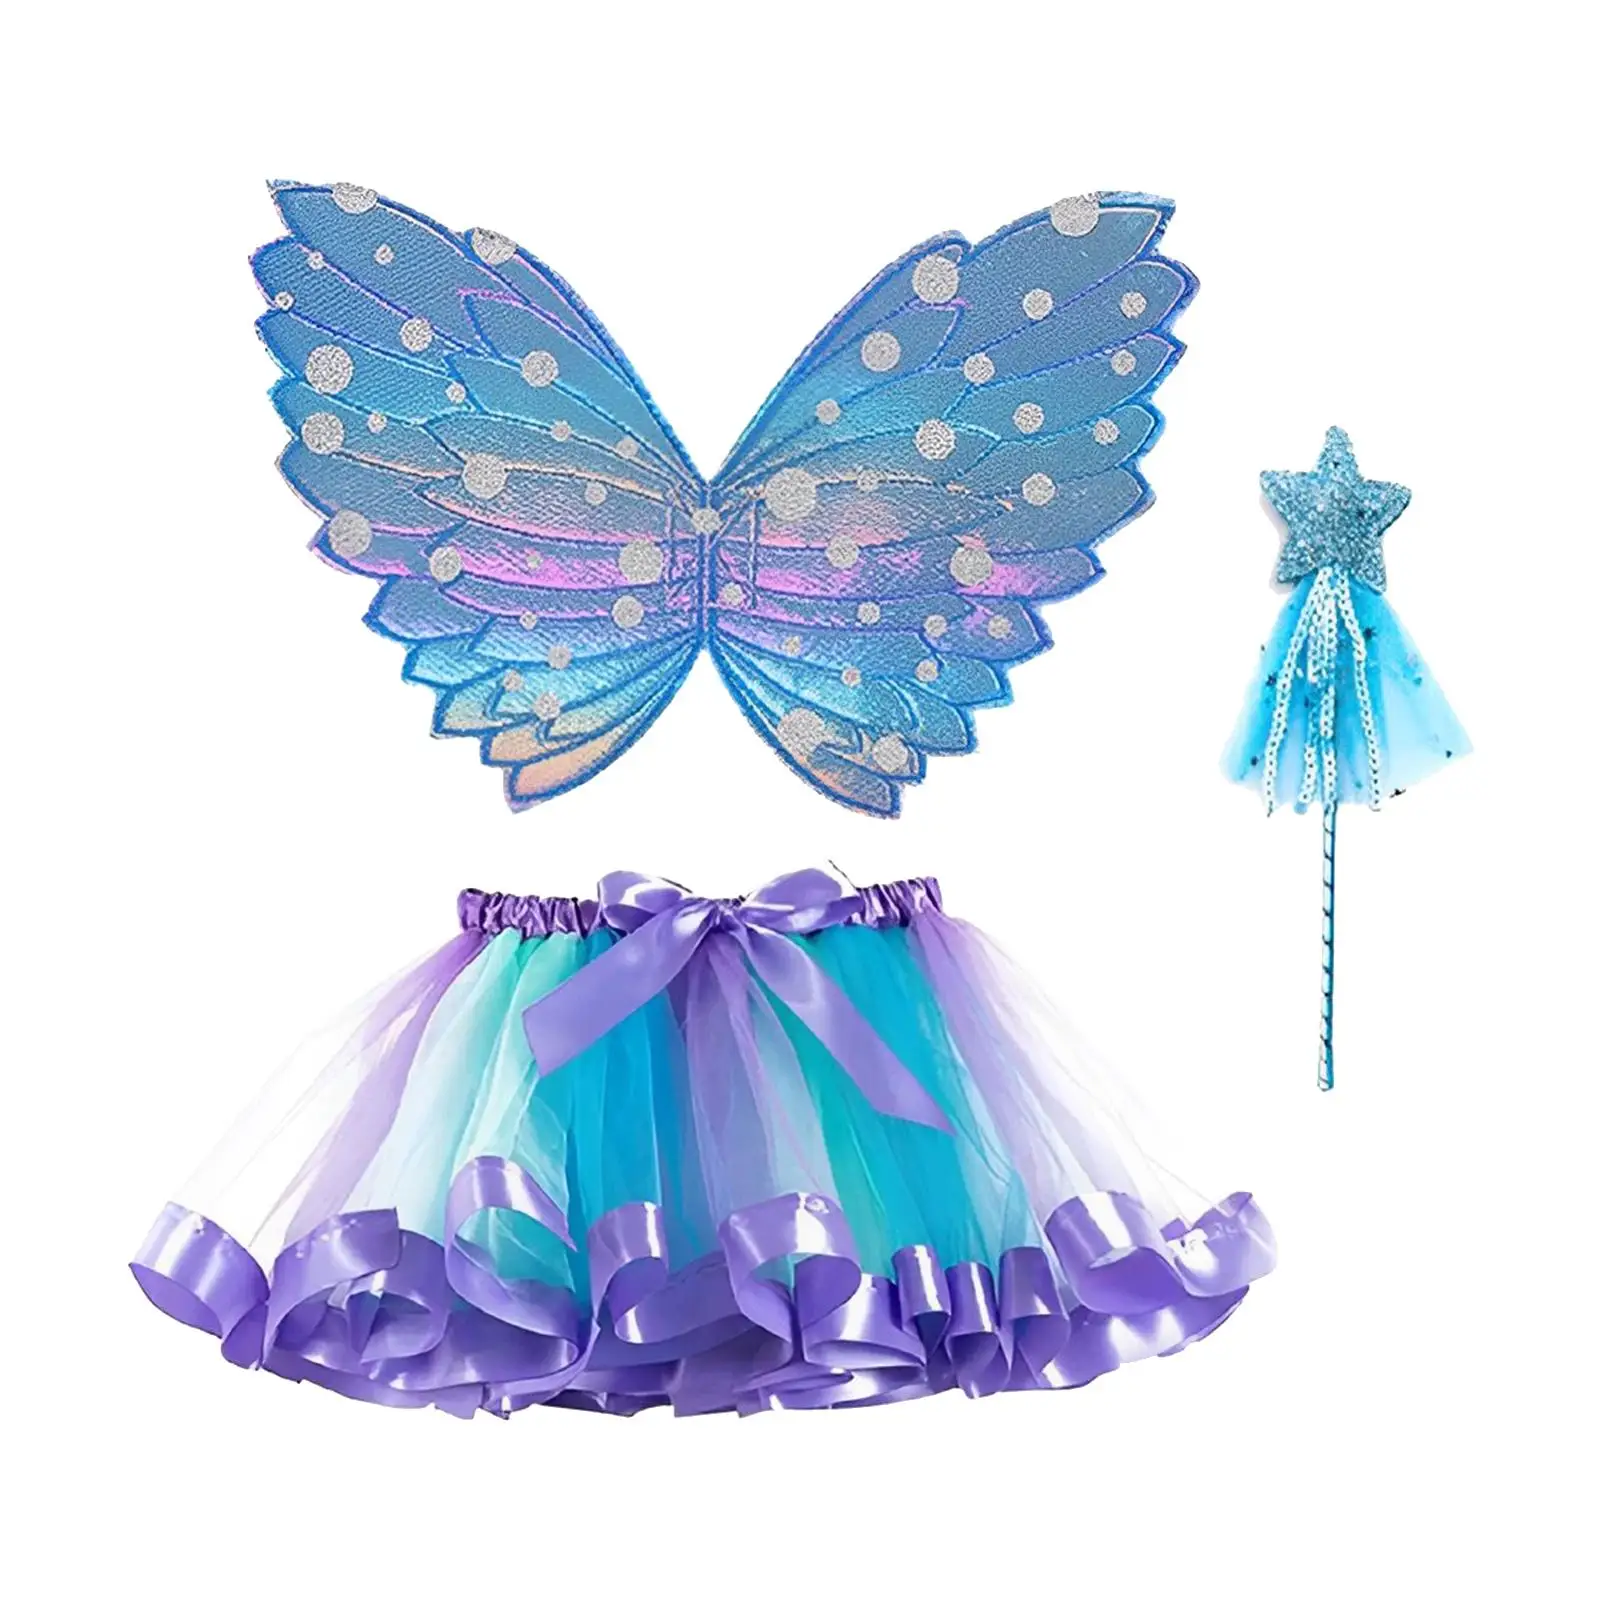 

Girls Fairy Costume Set Kids Elf Cosplay Butterfly Fairy Wing Tutu Skirt Star Wand Dressing up for Photography Prop Party Favors